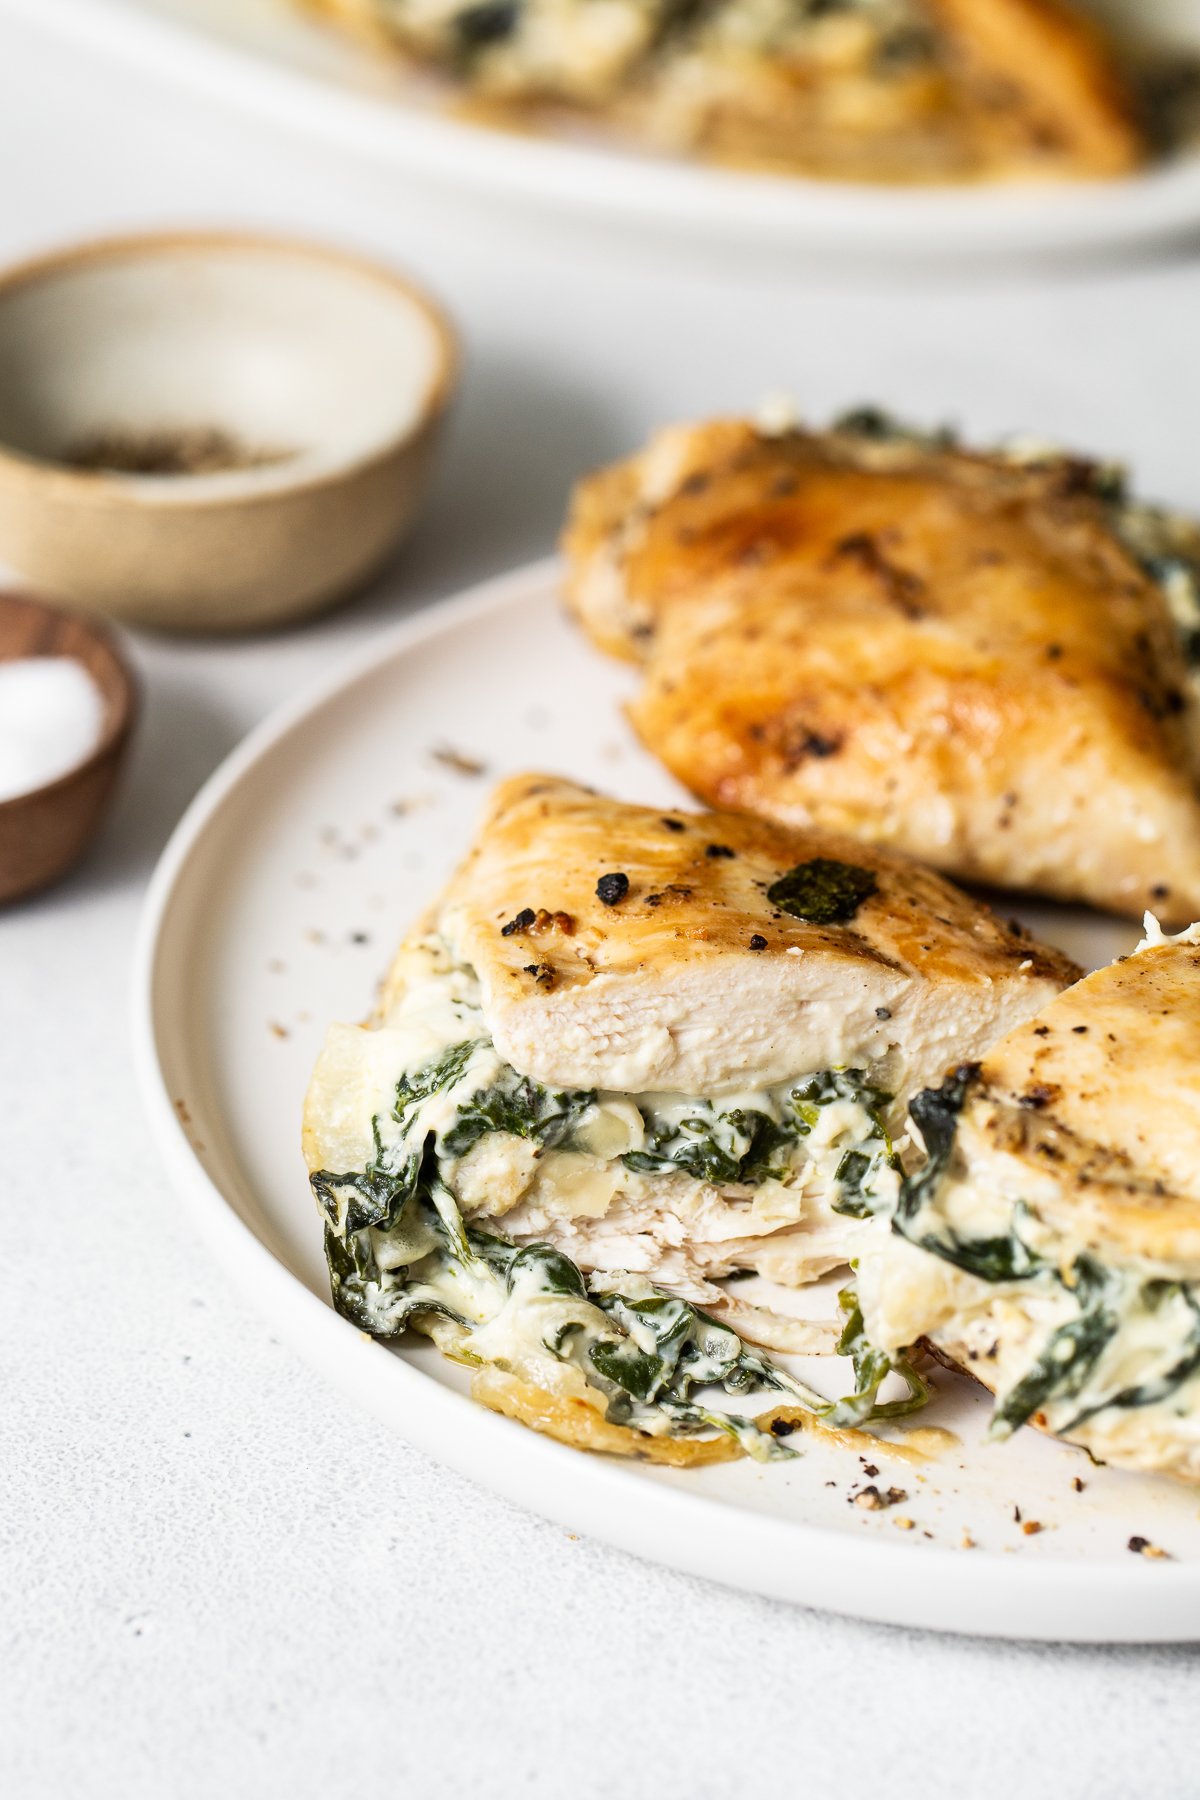 Spinach stuffed chicken breast on a plate.